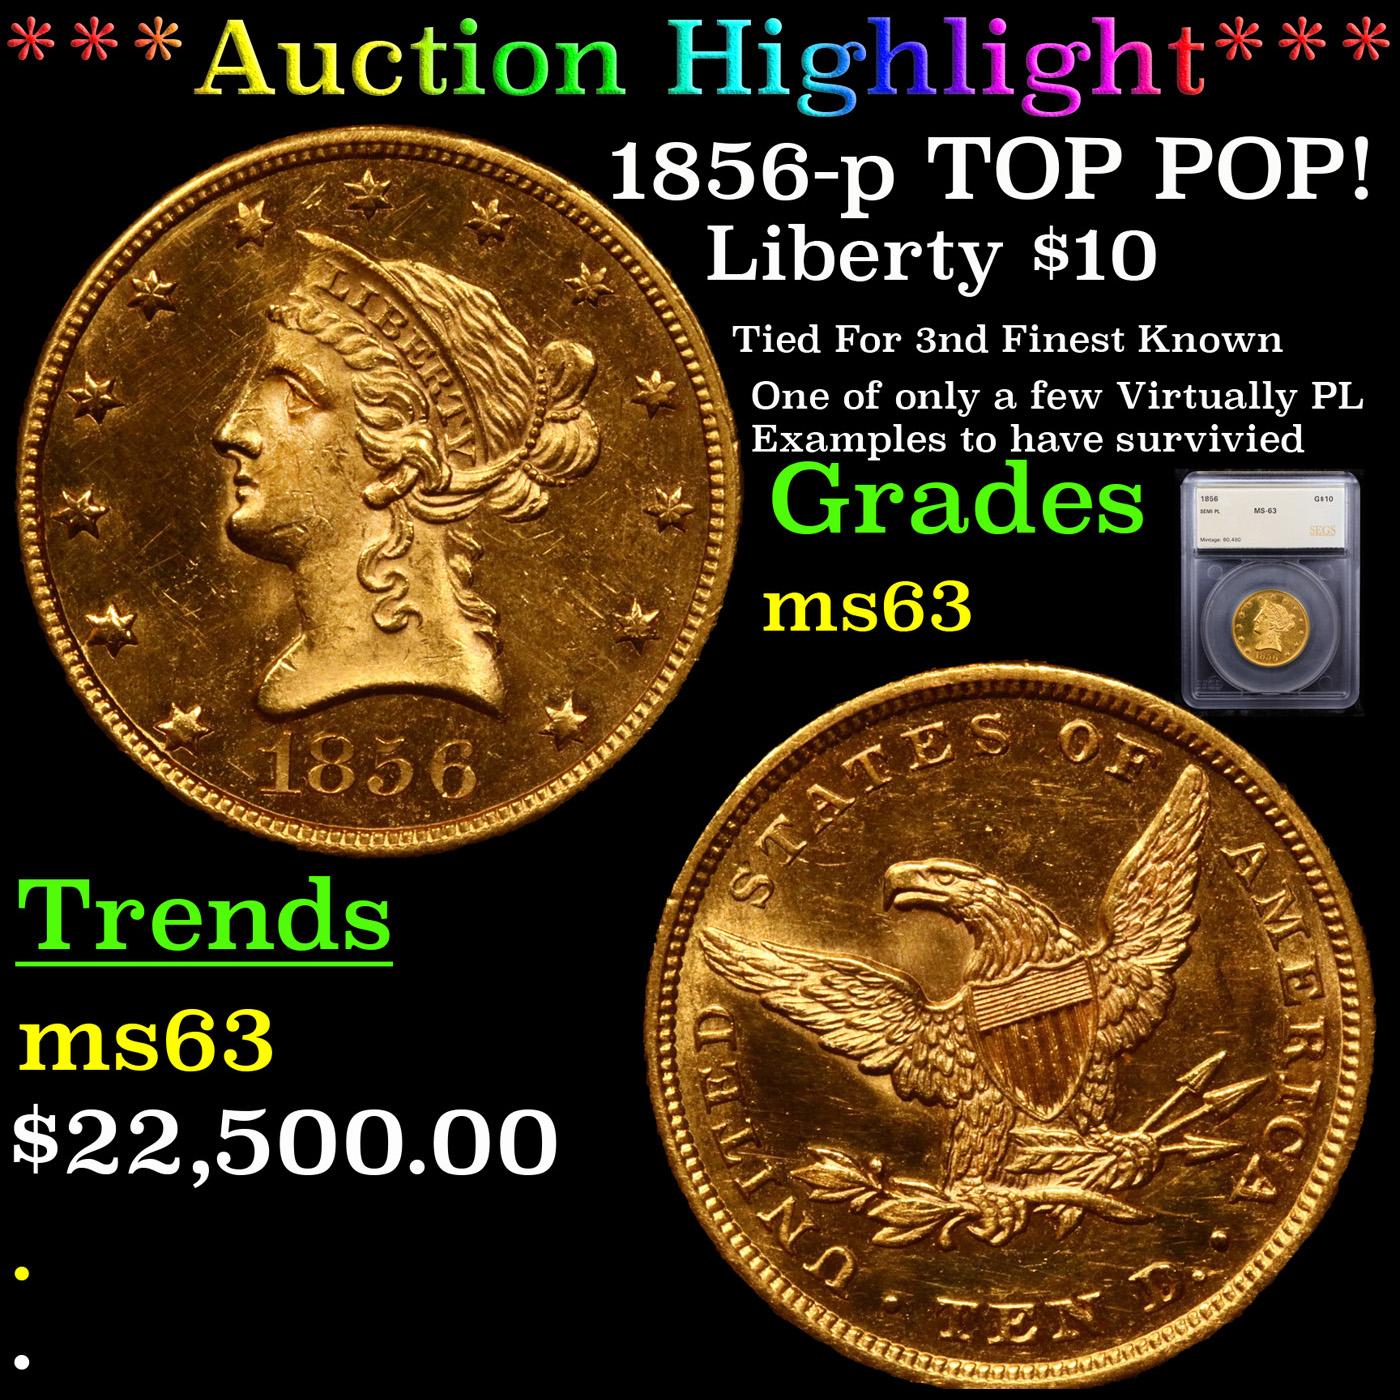 ***Auction Highlight*** 1856-p TOP POP! Gold Liberty Eagle $10 Graded ms63 By SEGS (fc)